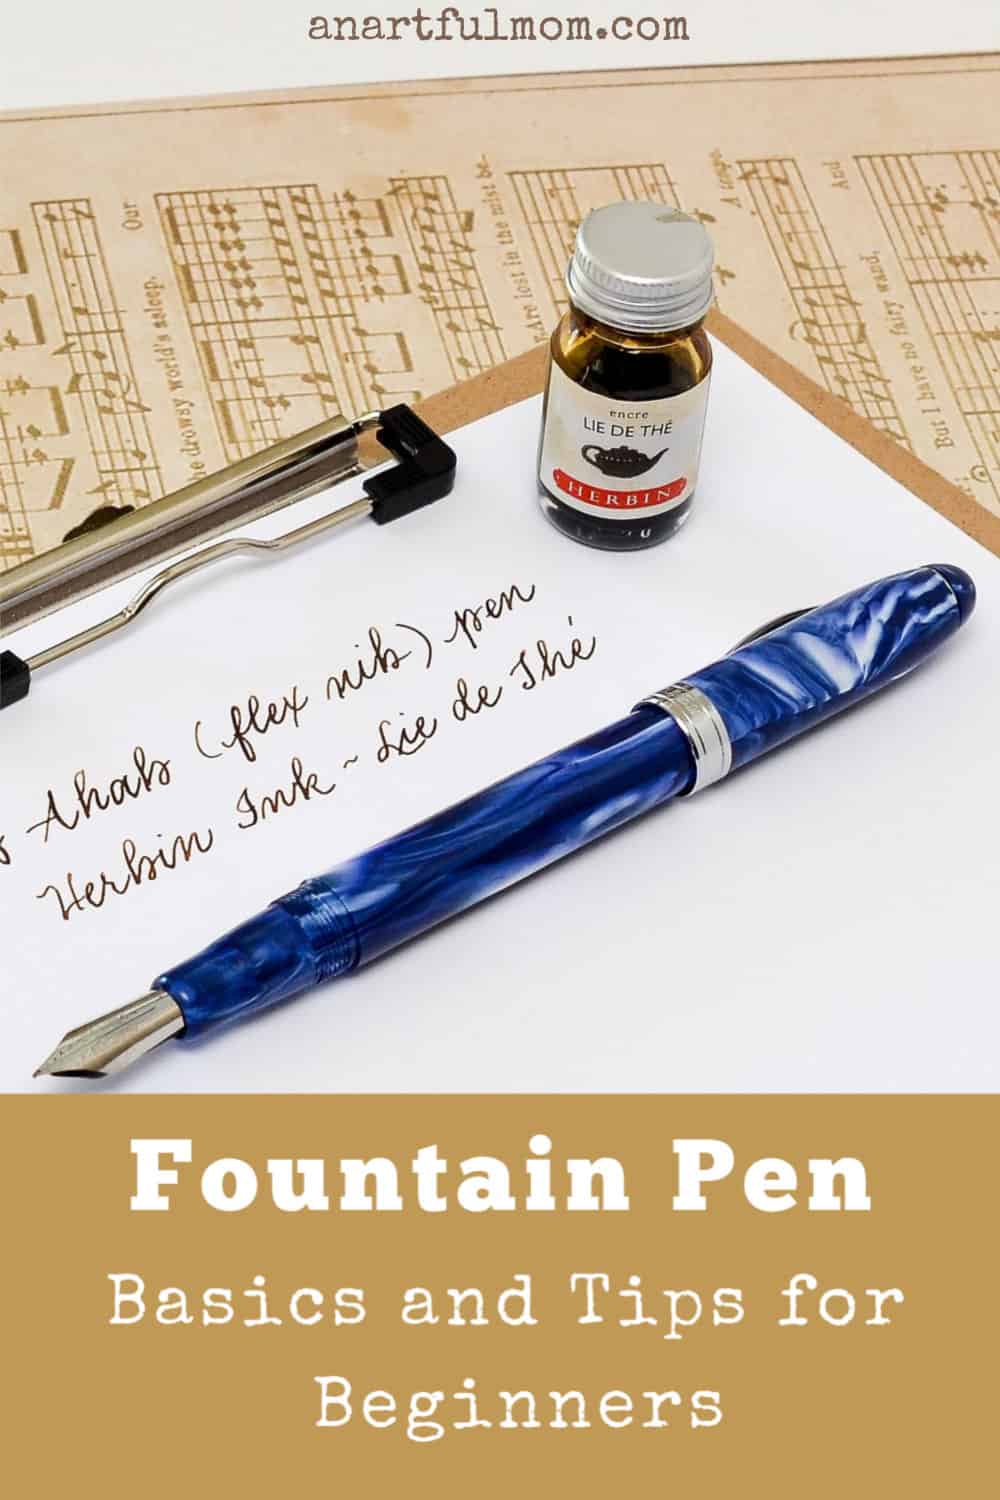 Fountain Pen Basics and Tips for Beginners